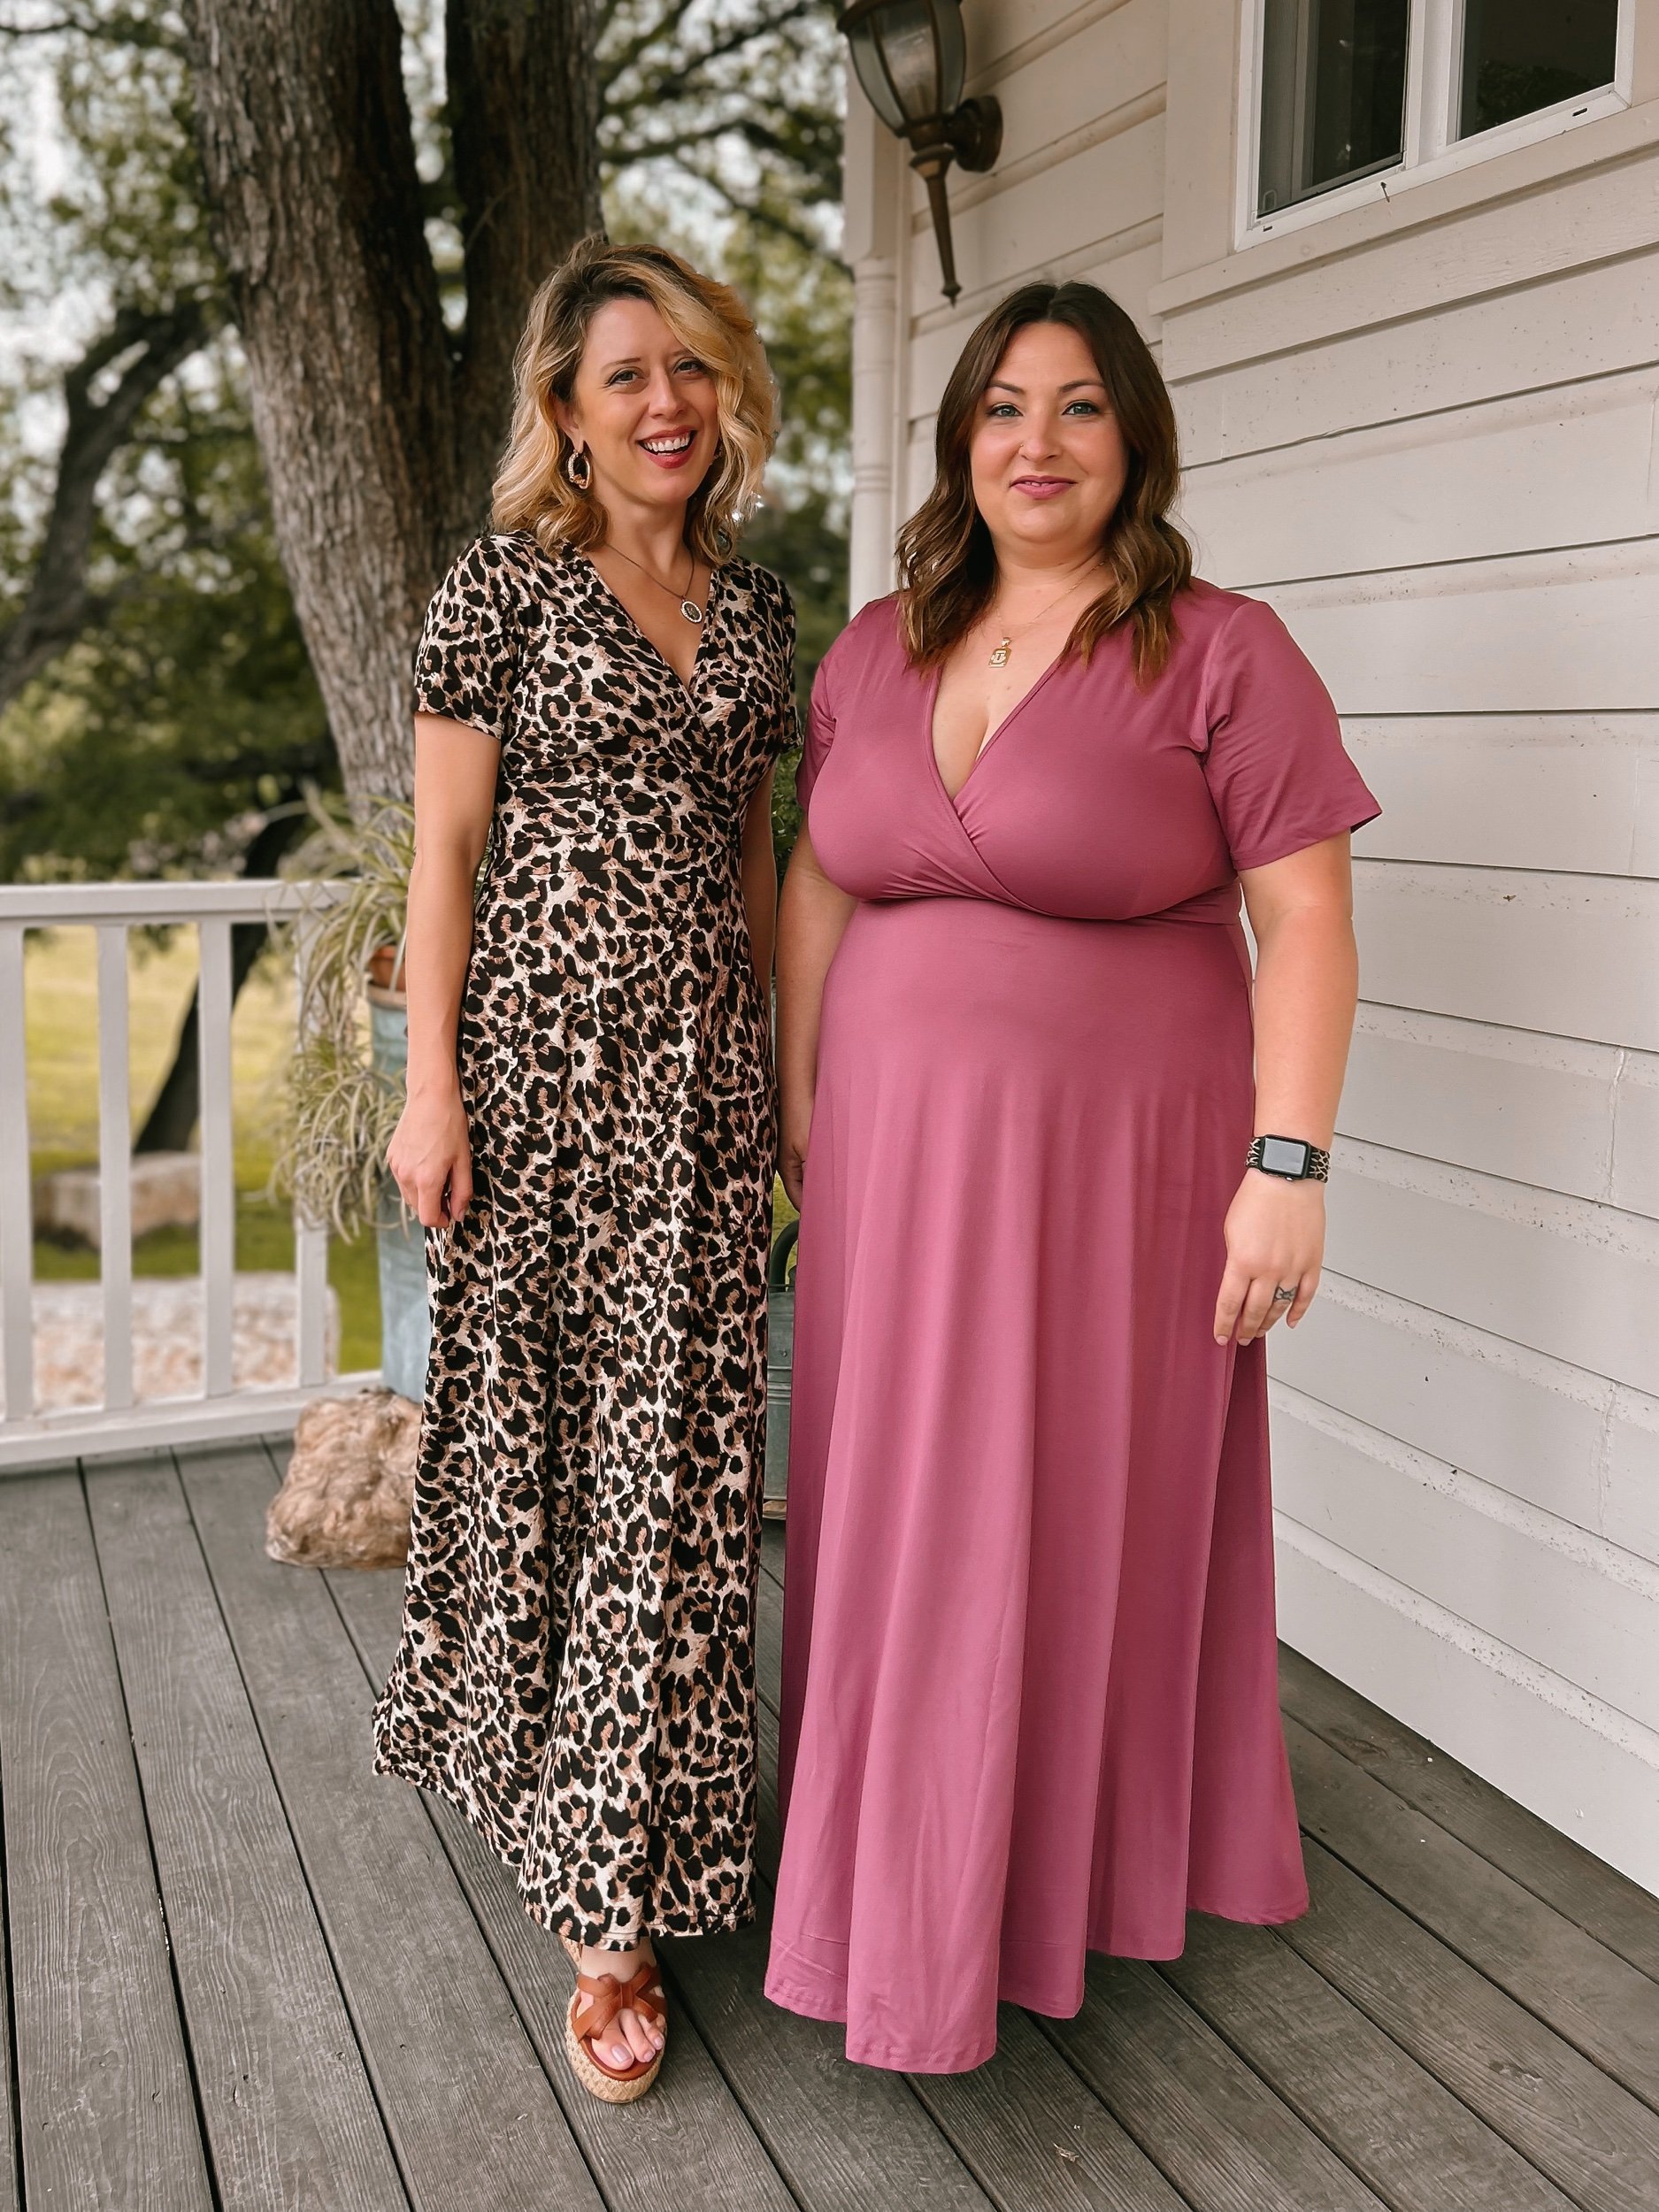 Three Heel Clicks - Girl's Day in Salado While We Talk About Body Positivity